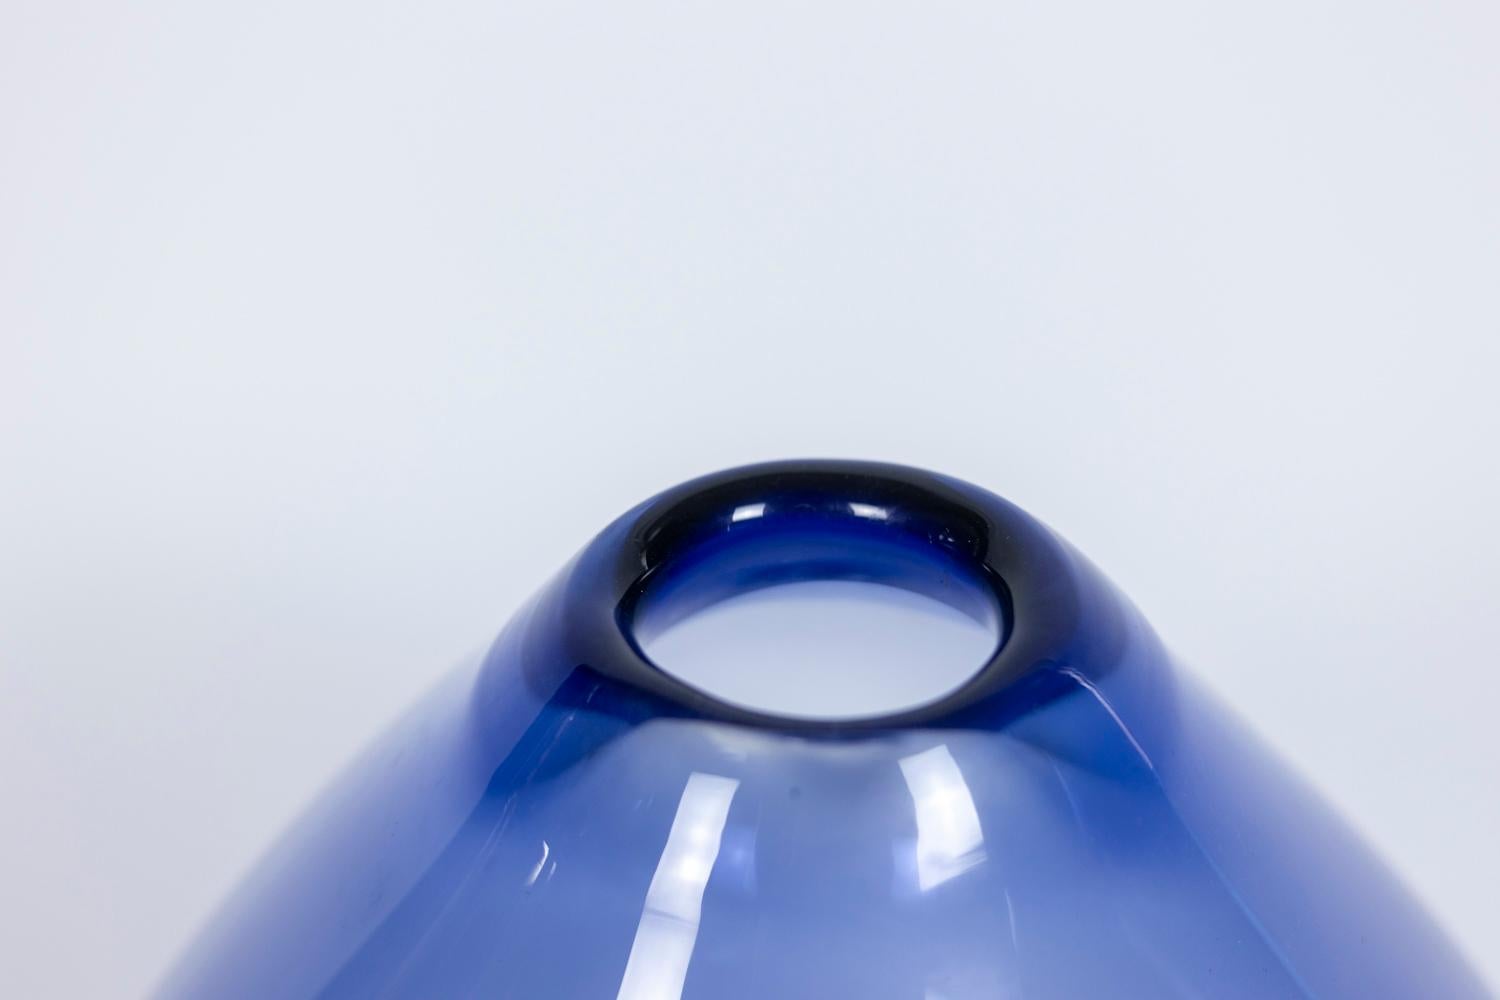 Per Lütken, attributed to. 
Holmgaard, edited by. 

Blown glass vase, drop shape and sapphire blue color.

Danish work made in the 1960s.